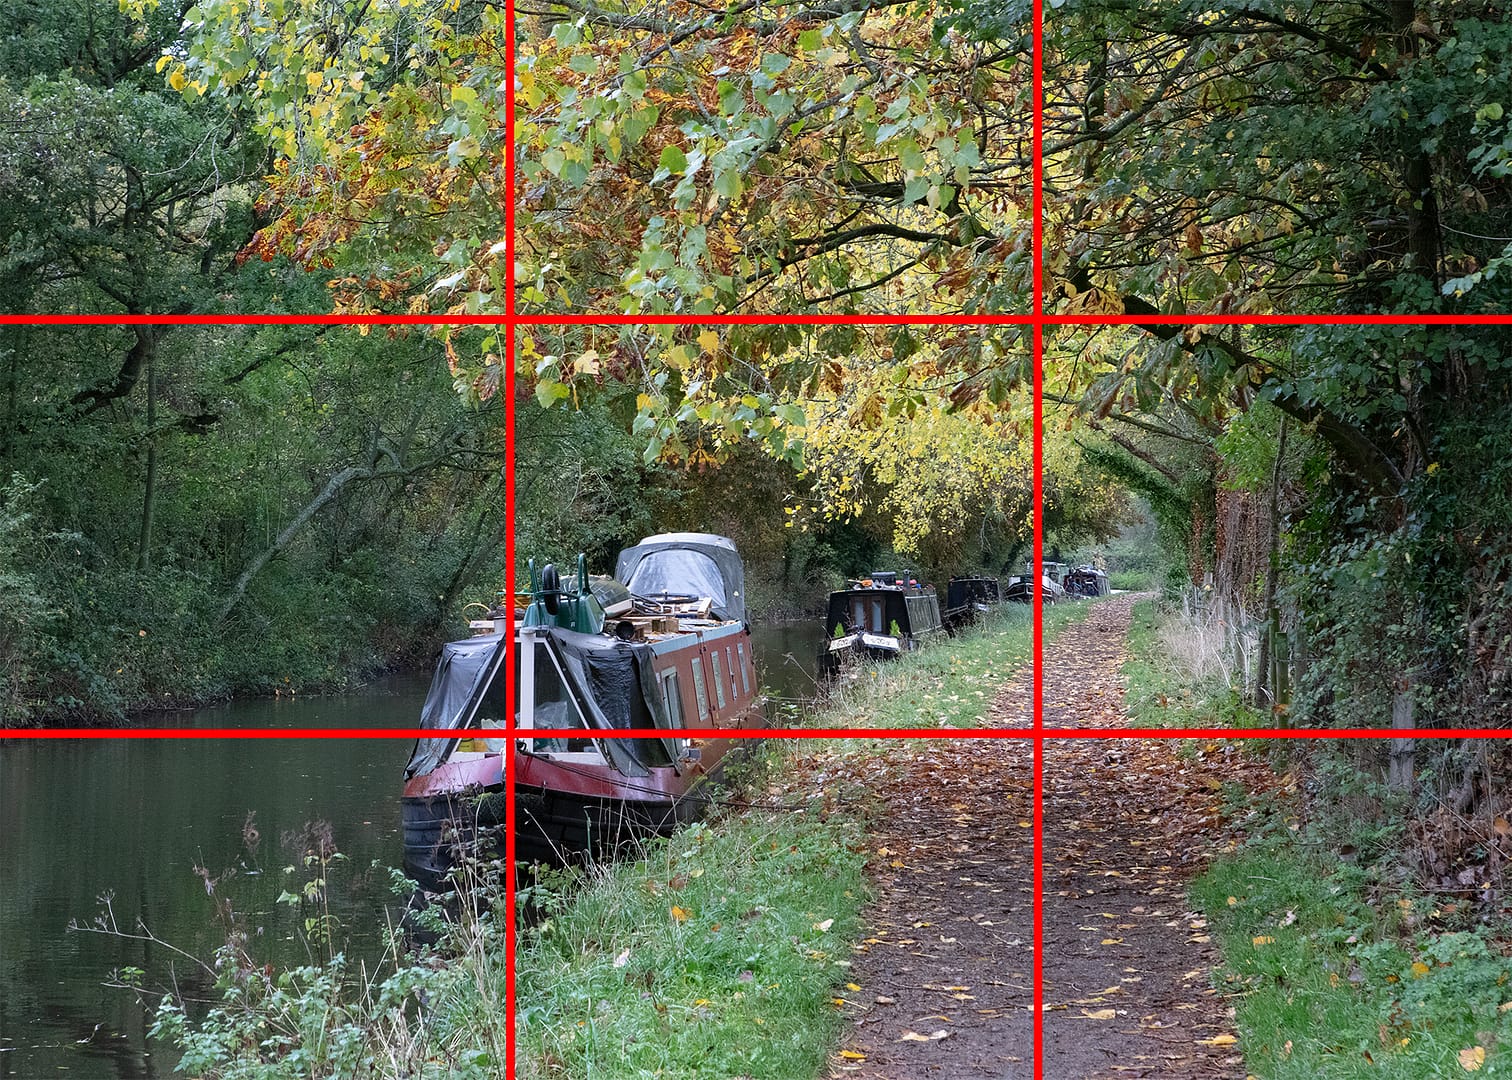 Photography composition tips - Rule of Thirds in Photography